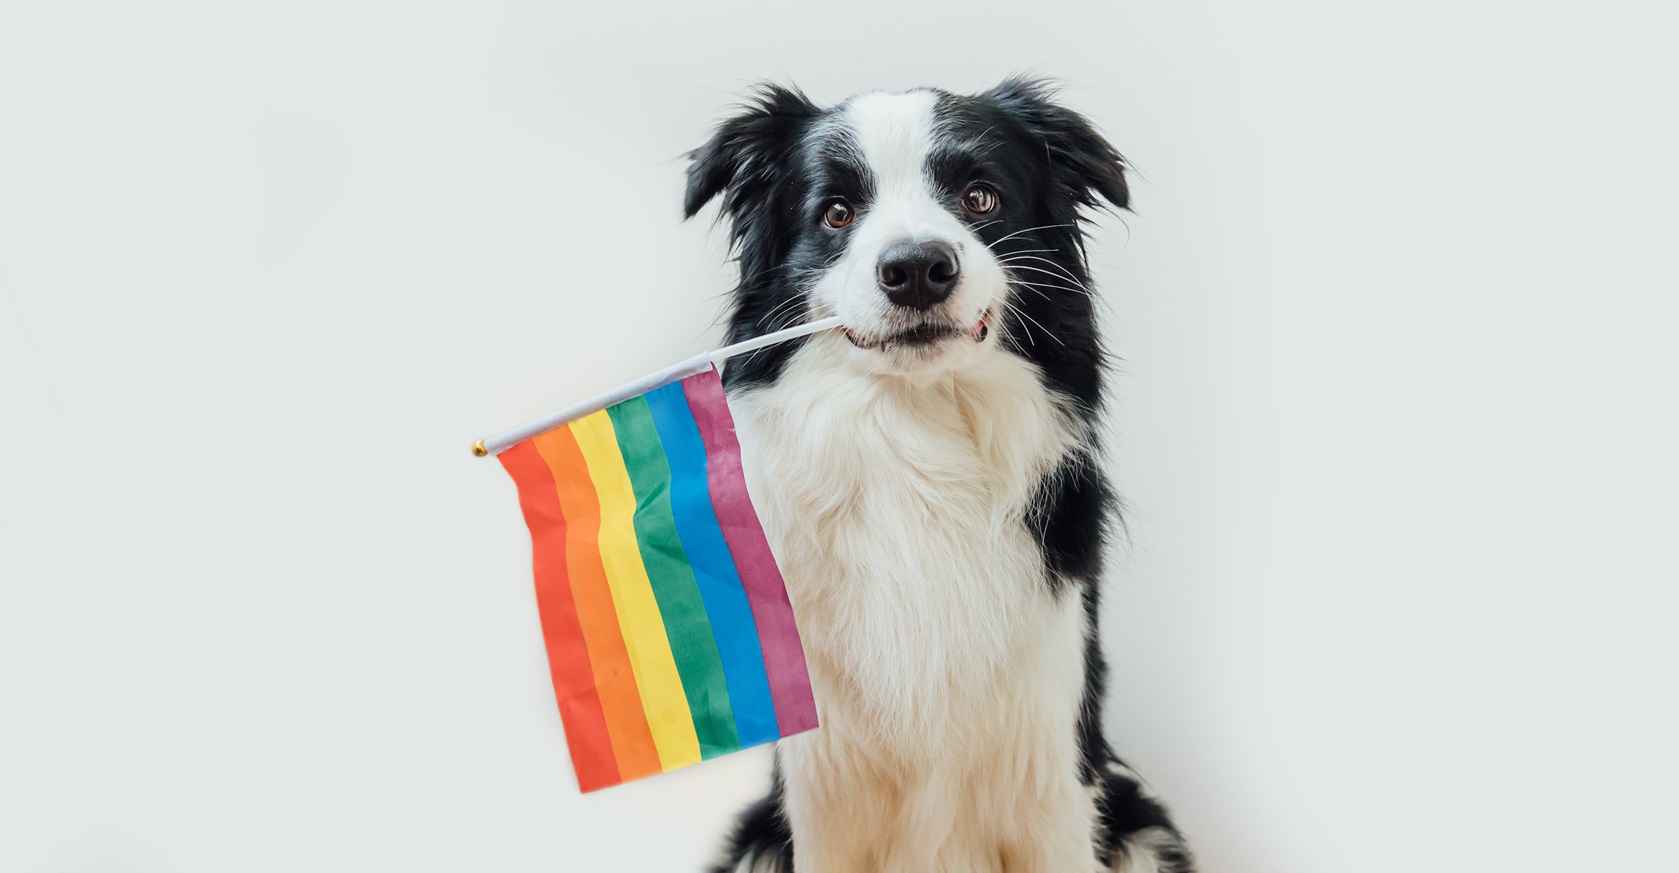 Dog with pride flag in mouth